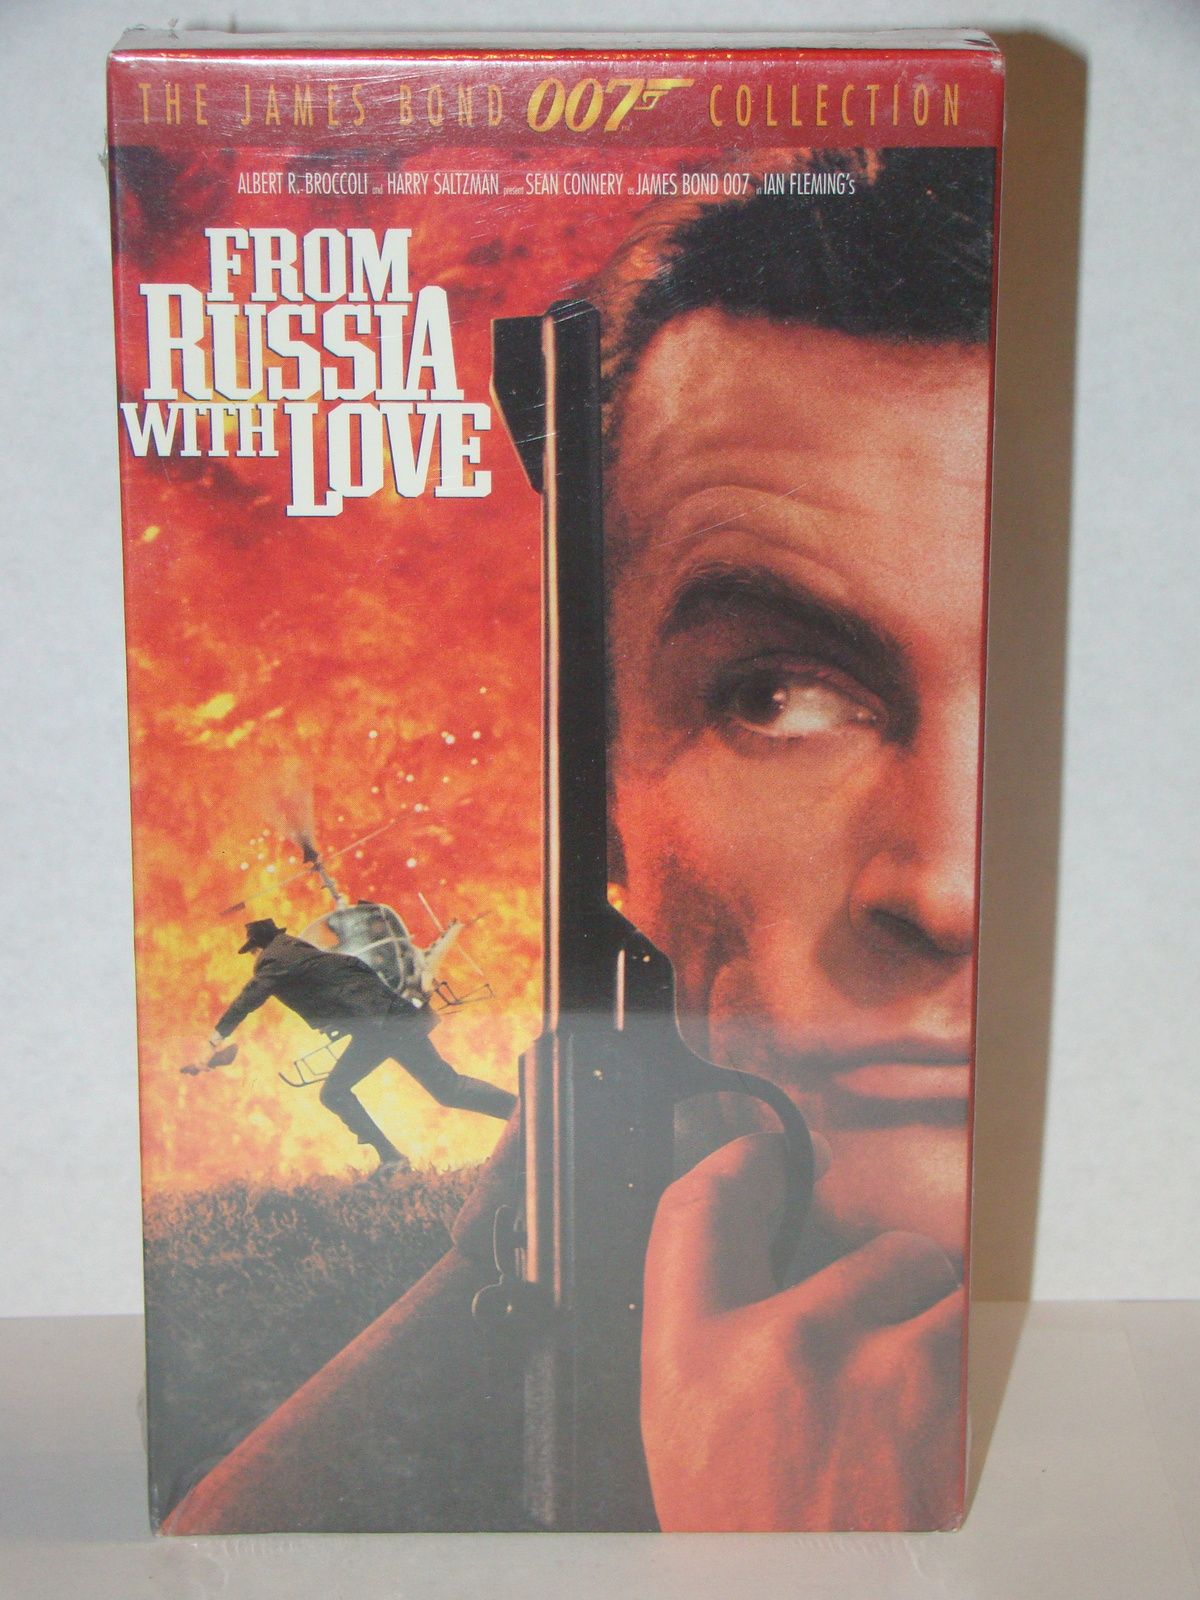 Primary image for THE JAMES BOND 007 COLLECTION - FROM RUSSIA WITH LOVE (NEW)